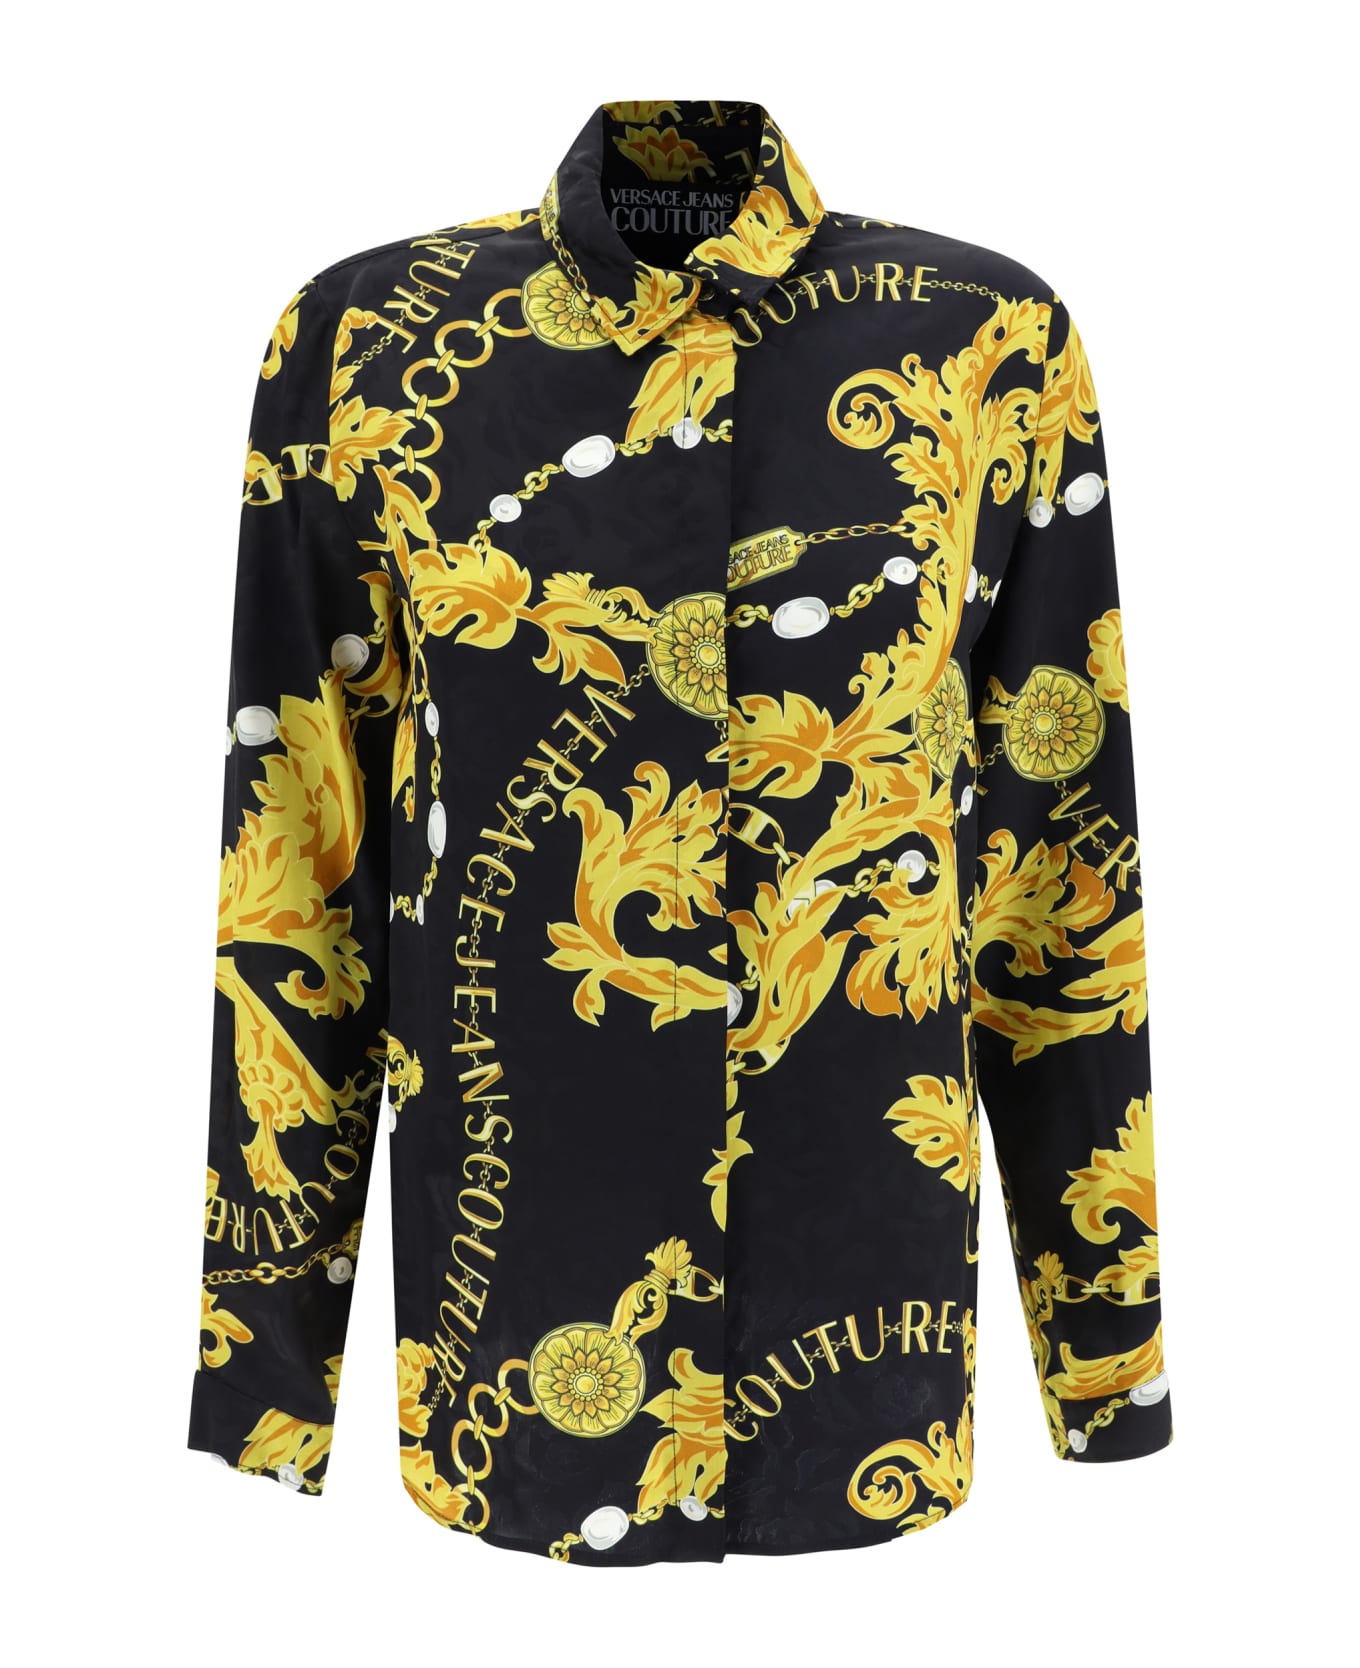 Versace Jeans Couture Co Shirts - Black/gold